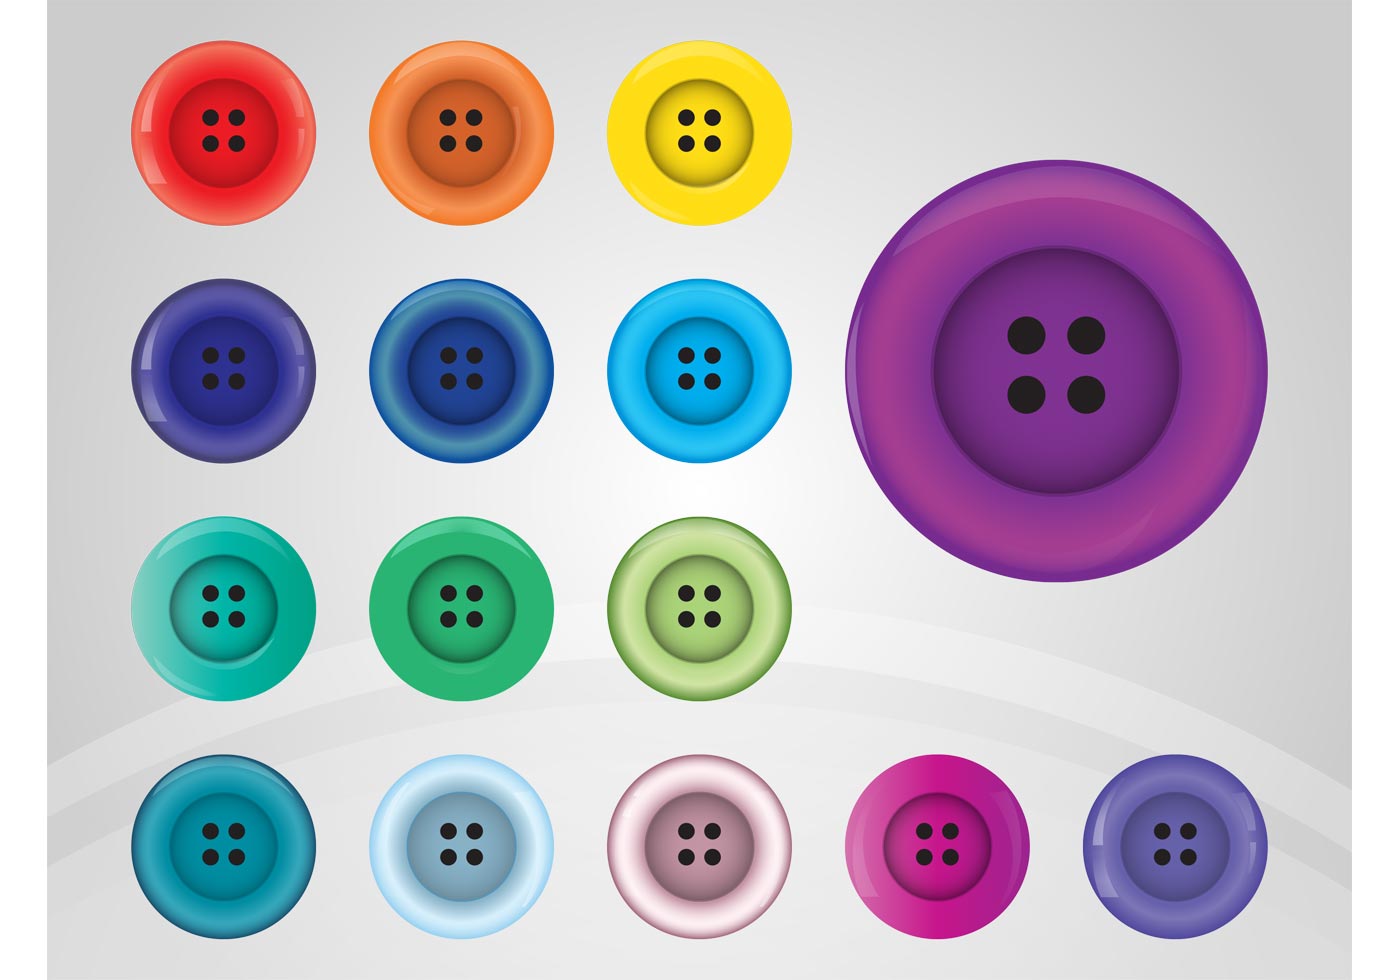 Download Button Free Vector Art - (39743 Free Downloads)